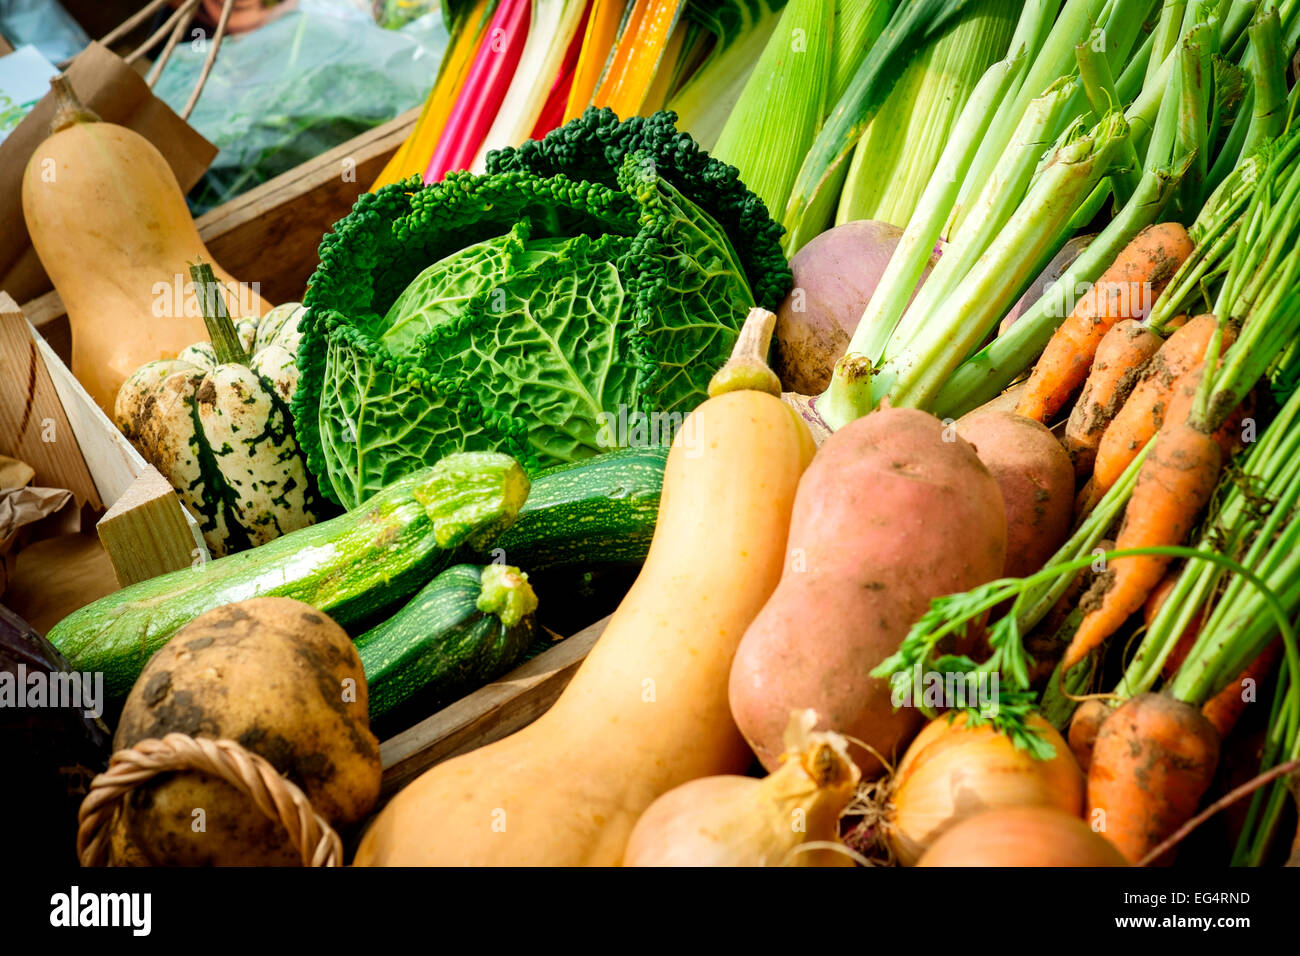 Variety of local fresh vegetables on farmers market stall, Isles of Scilly, UK Stock Photo